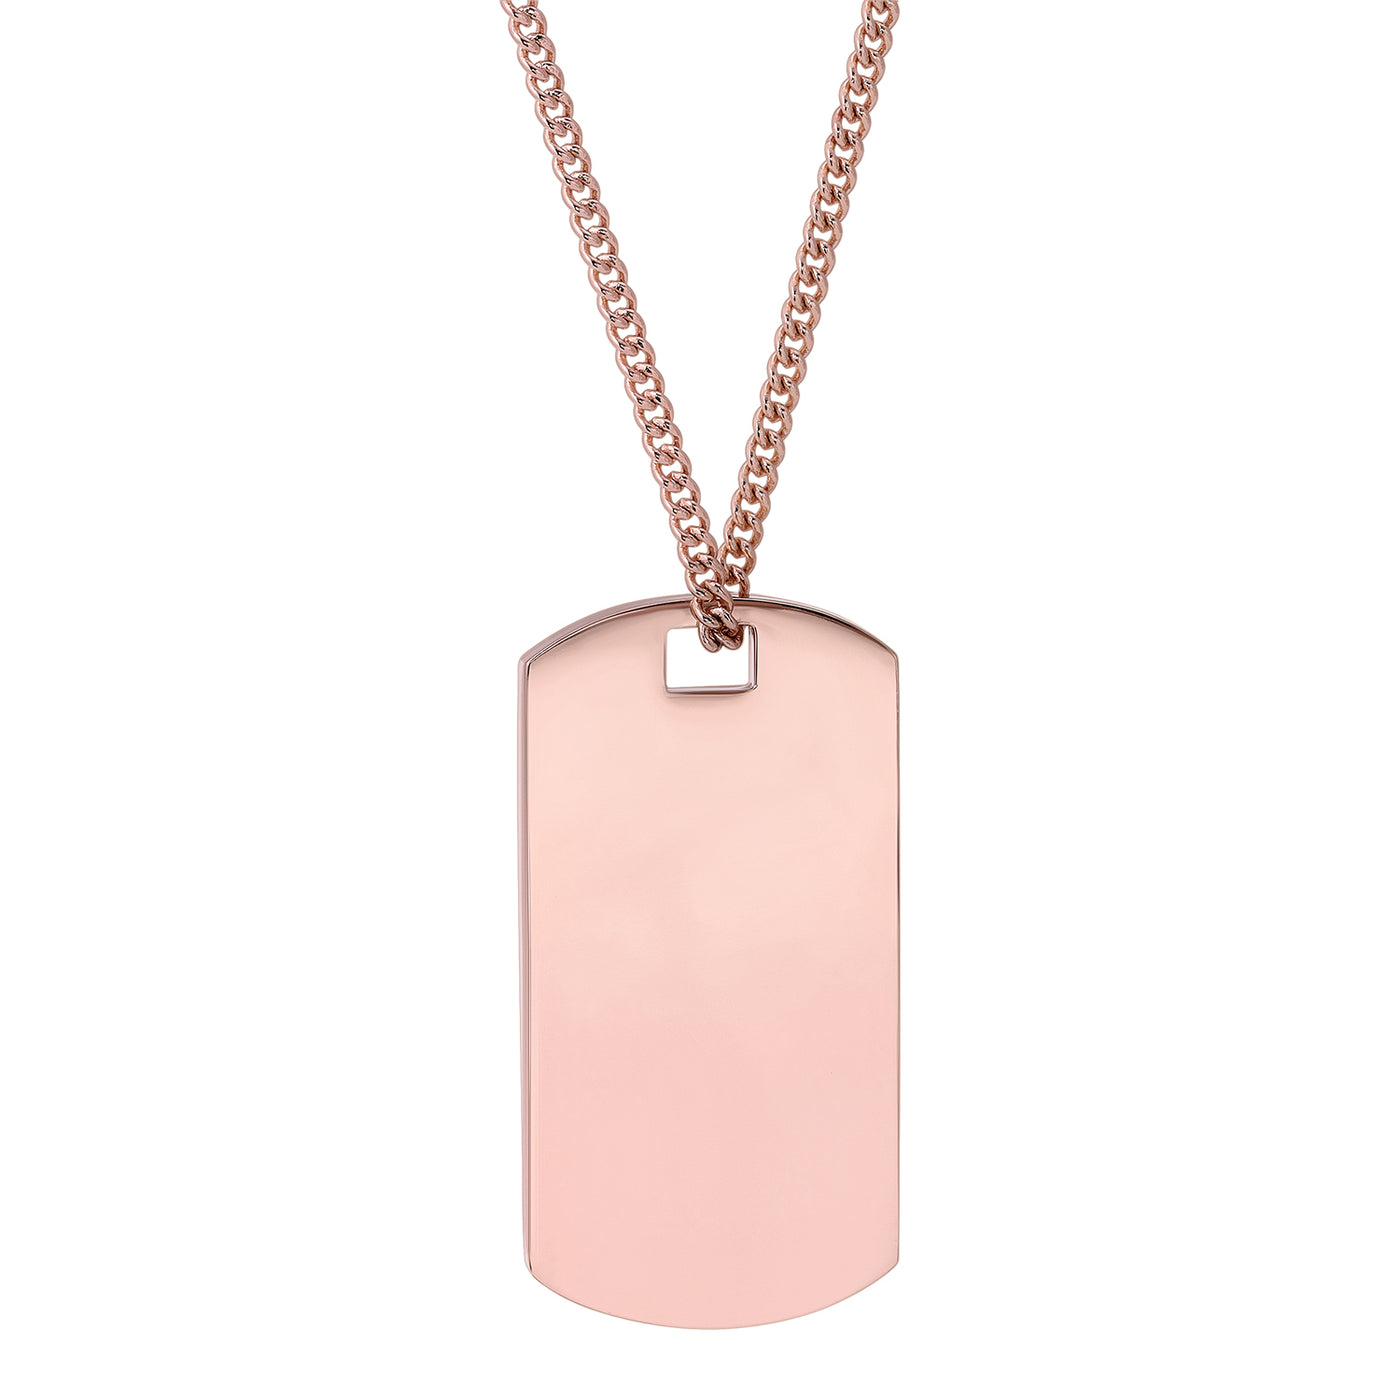 Solidarity Dog Tag Necklace in Rose Gold Plated